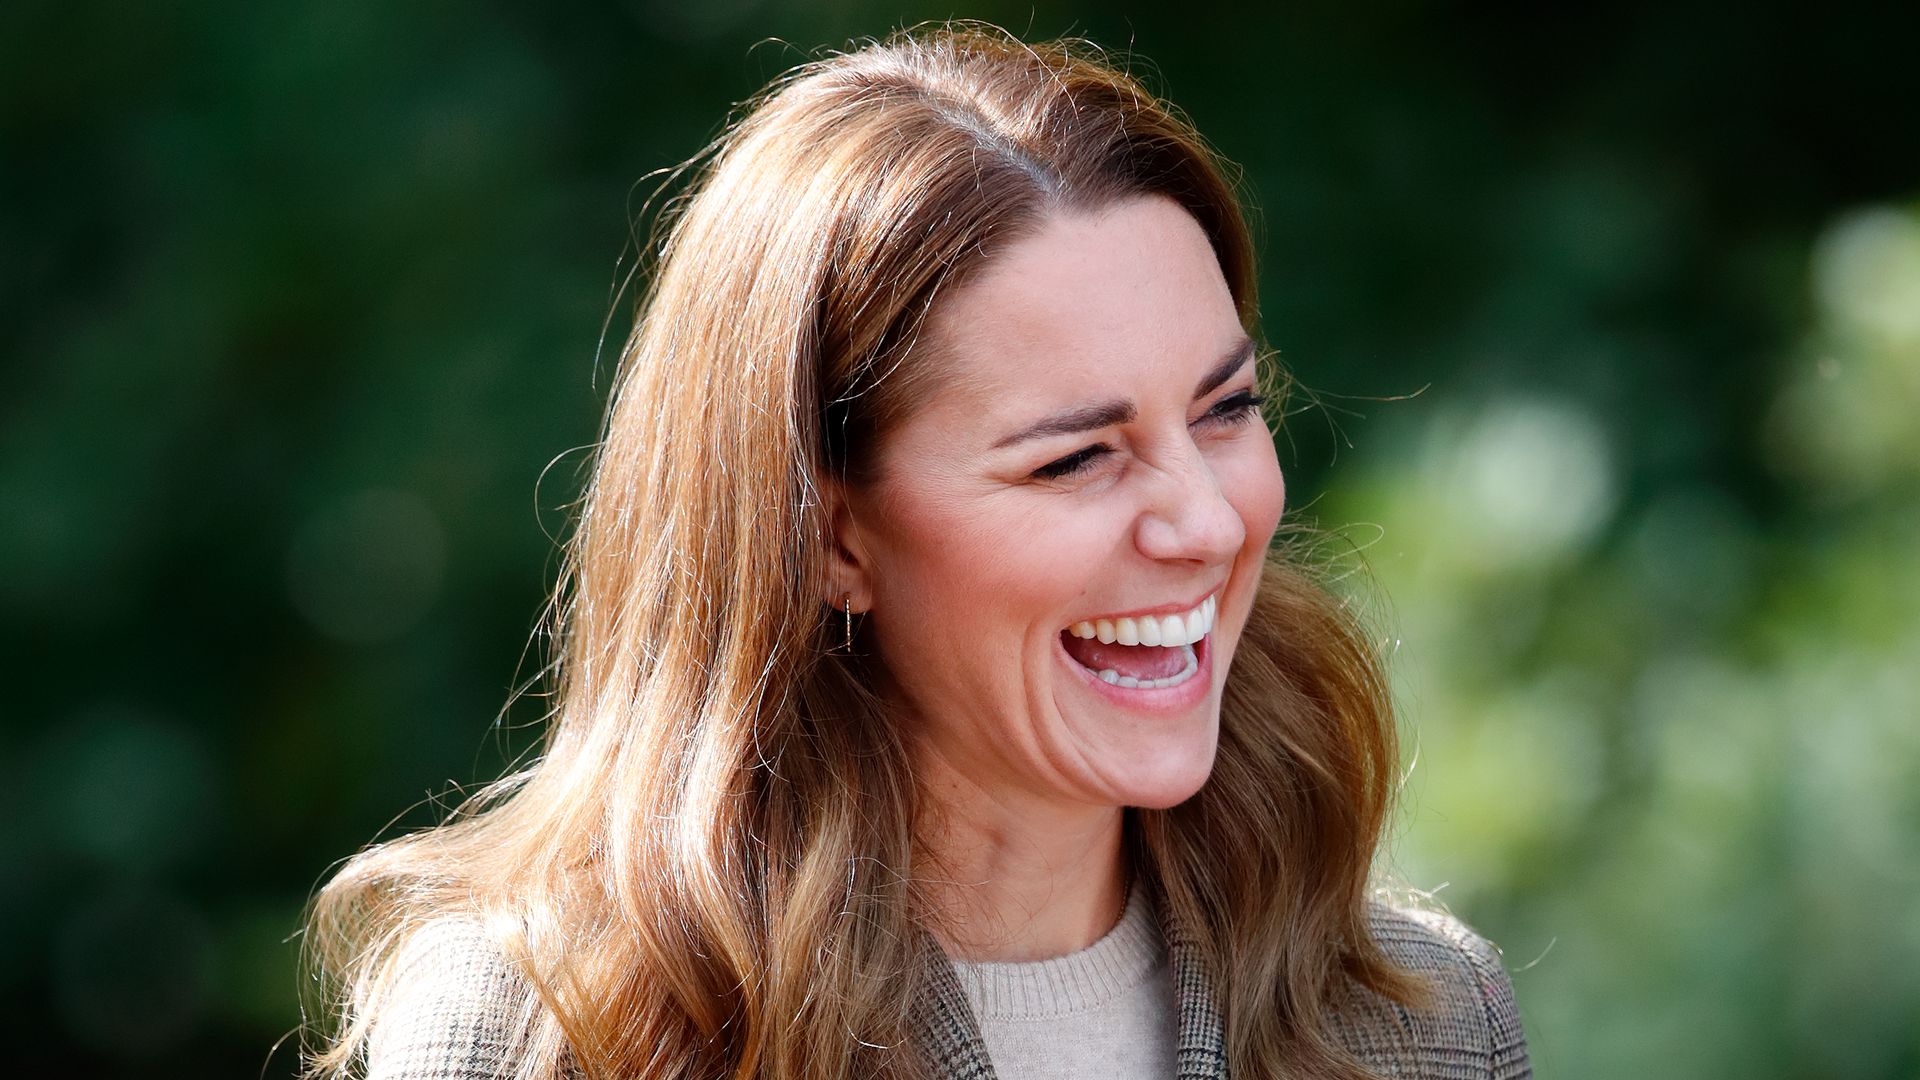 Princess Kate nails outdoorsy chic in designer combat boots and skinny jeans